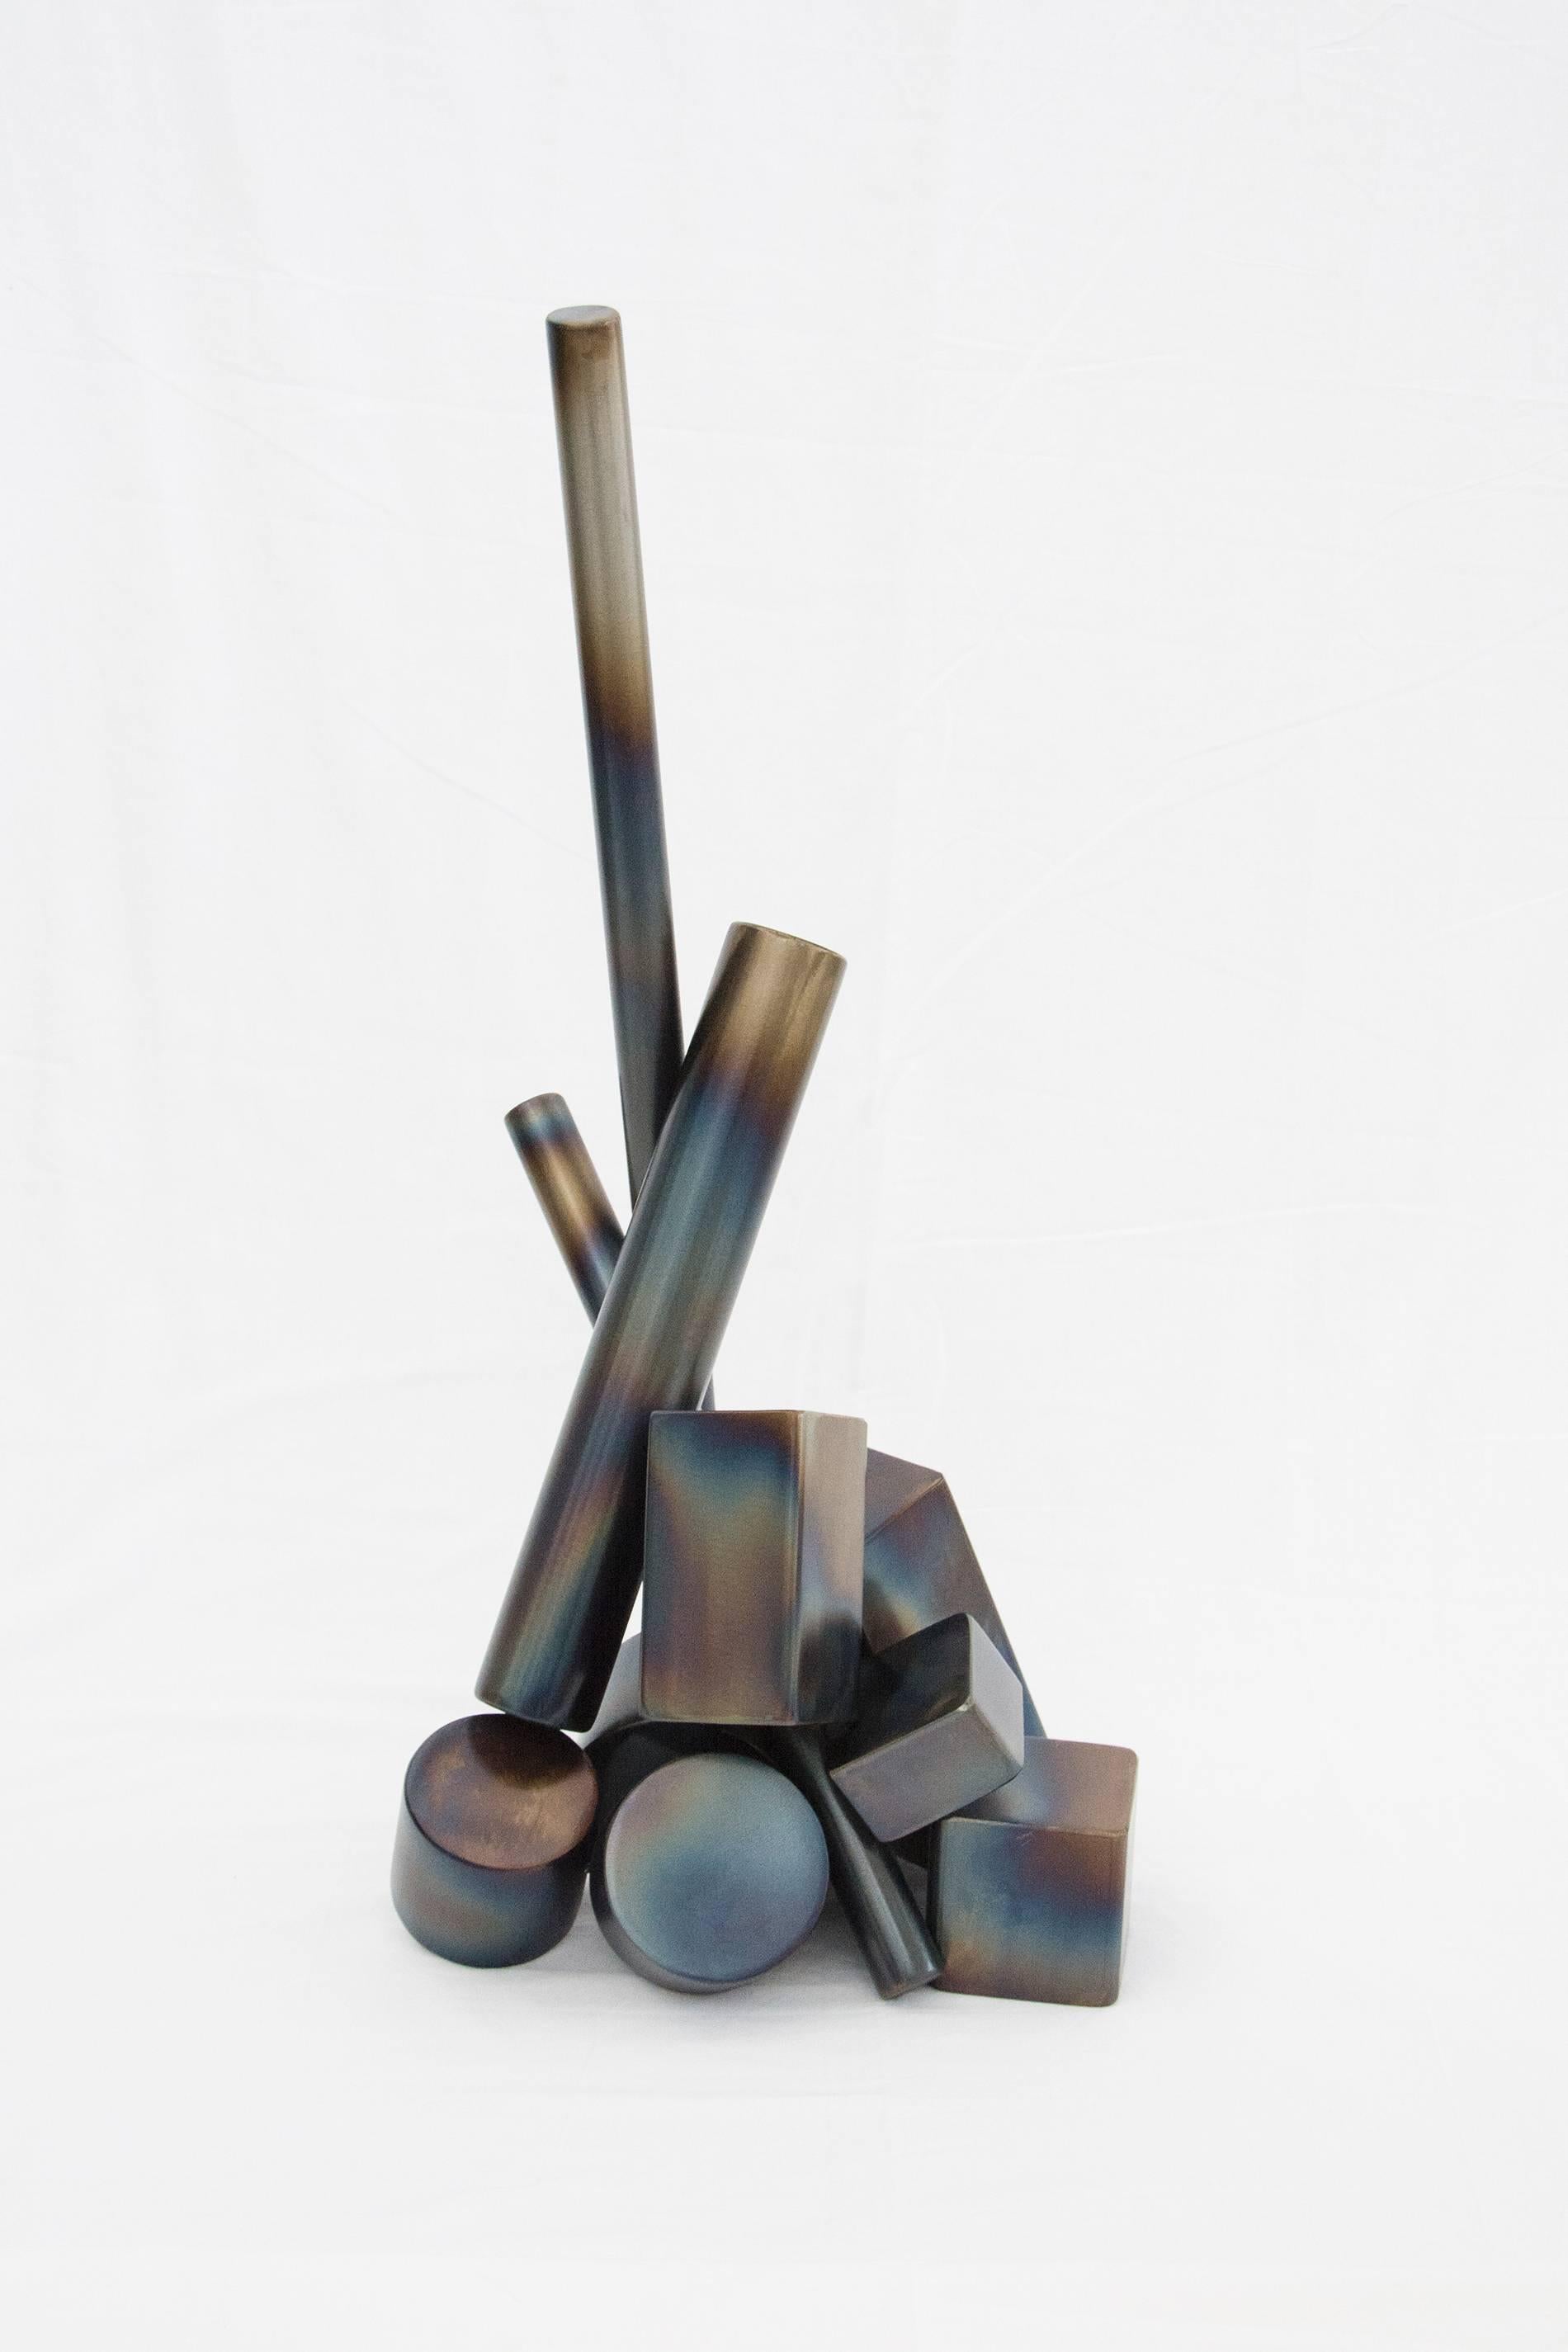 Primary - Sculpture by Rick Lapointe